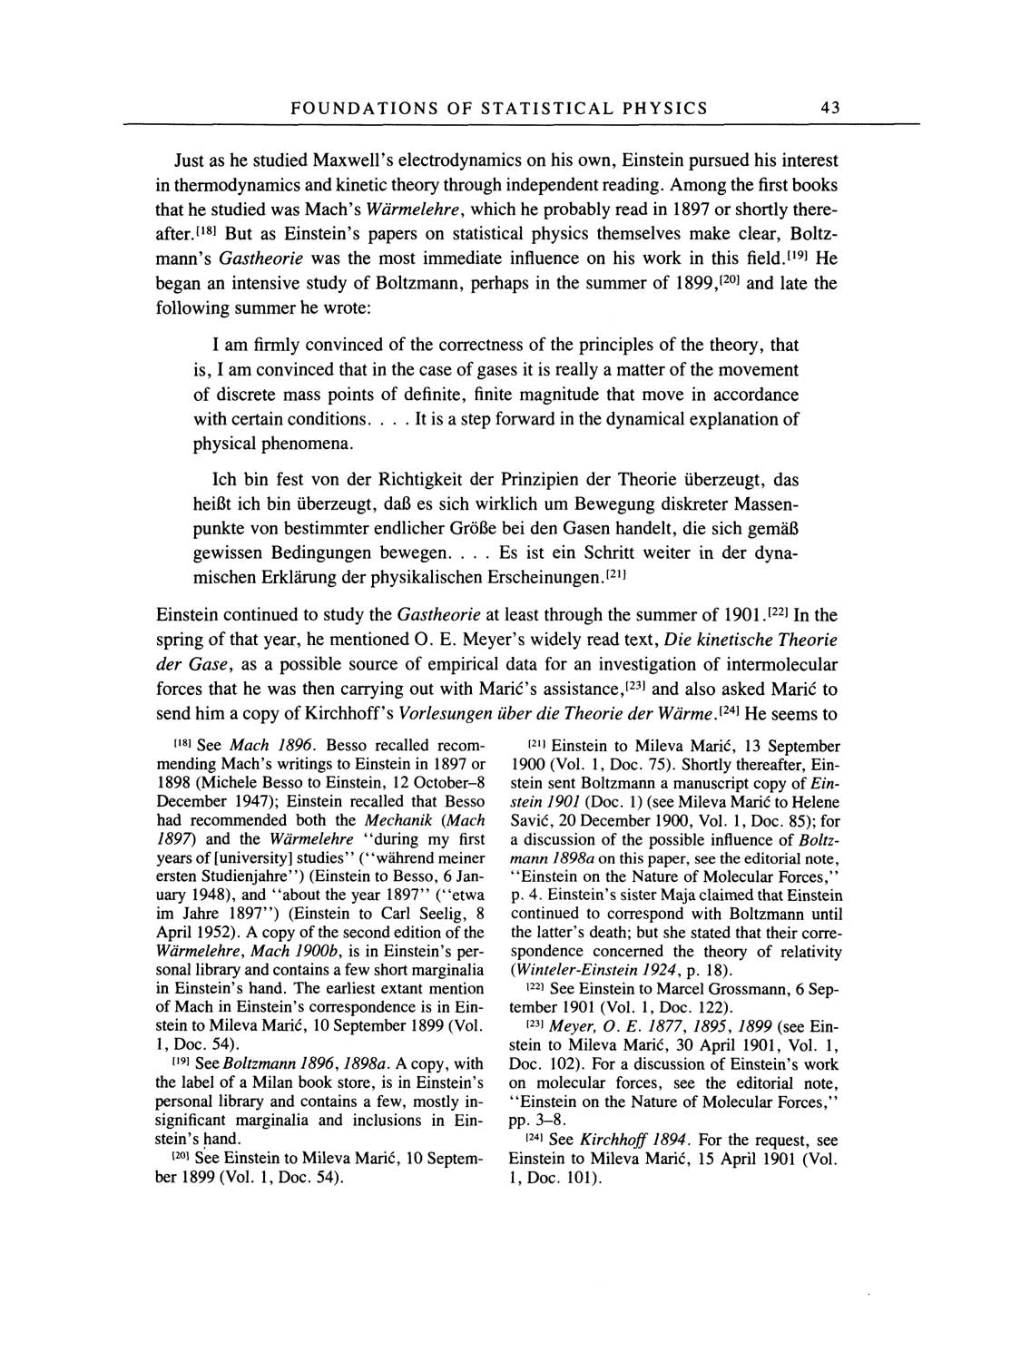 Volume 2: The Swiss Years: Writings, 1900-1909 page 43